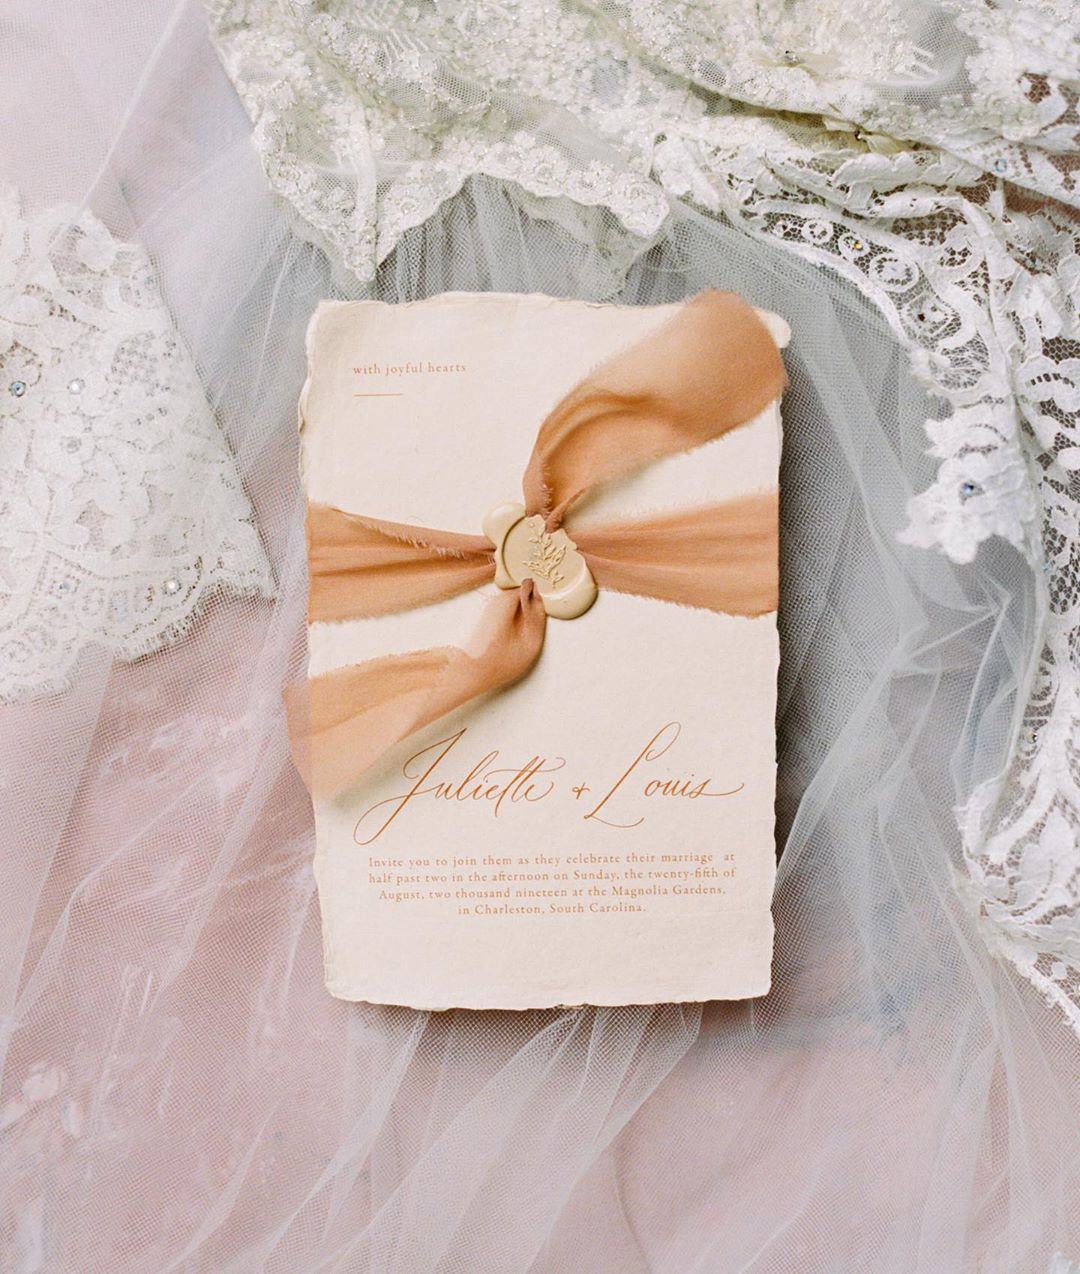 Modern romantic wedding invitations with minimalist fonts, a peach gossamer ribbon and melted wax seal by Dominique Alba | Styling by Willow and Oak Events and photography by Brian D Smith Photography